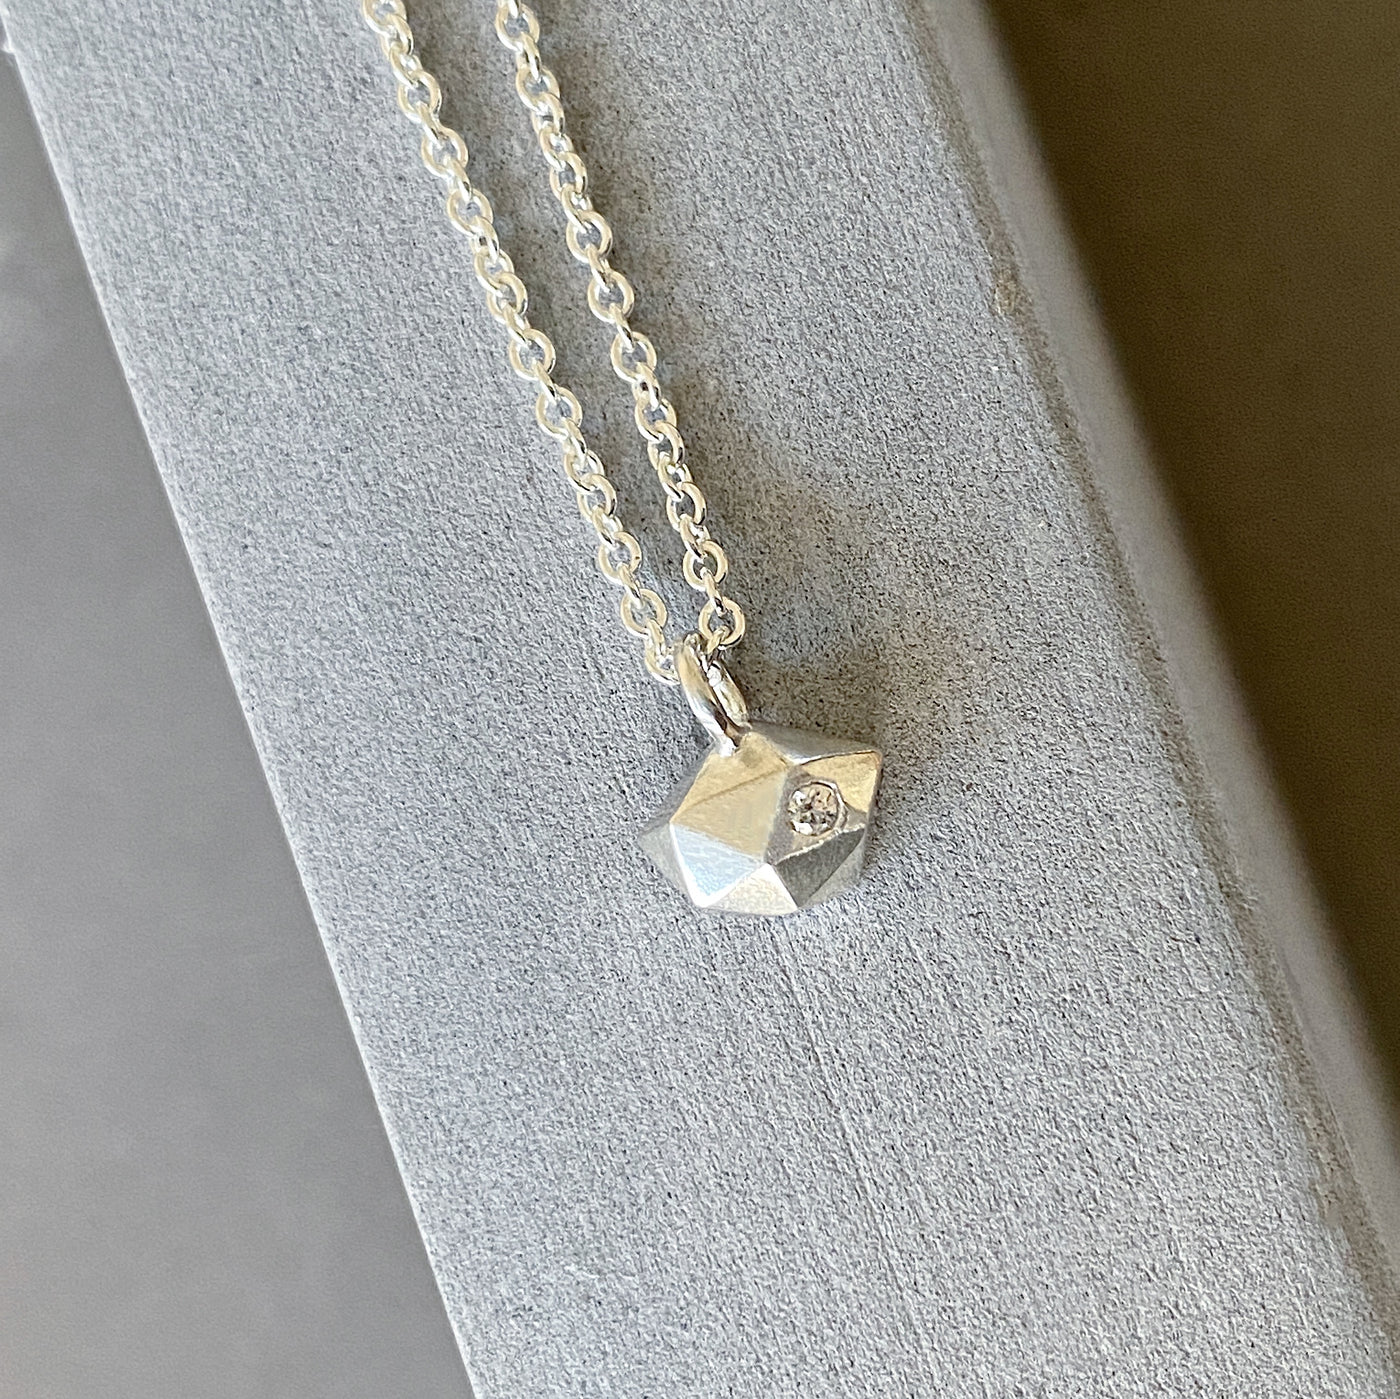 Sterling silver wabi-sabi faceted geometric necklace with a single diamond facet by Corey Egan on concrete